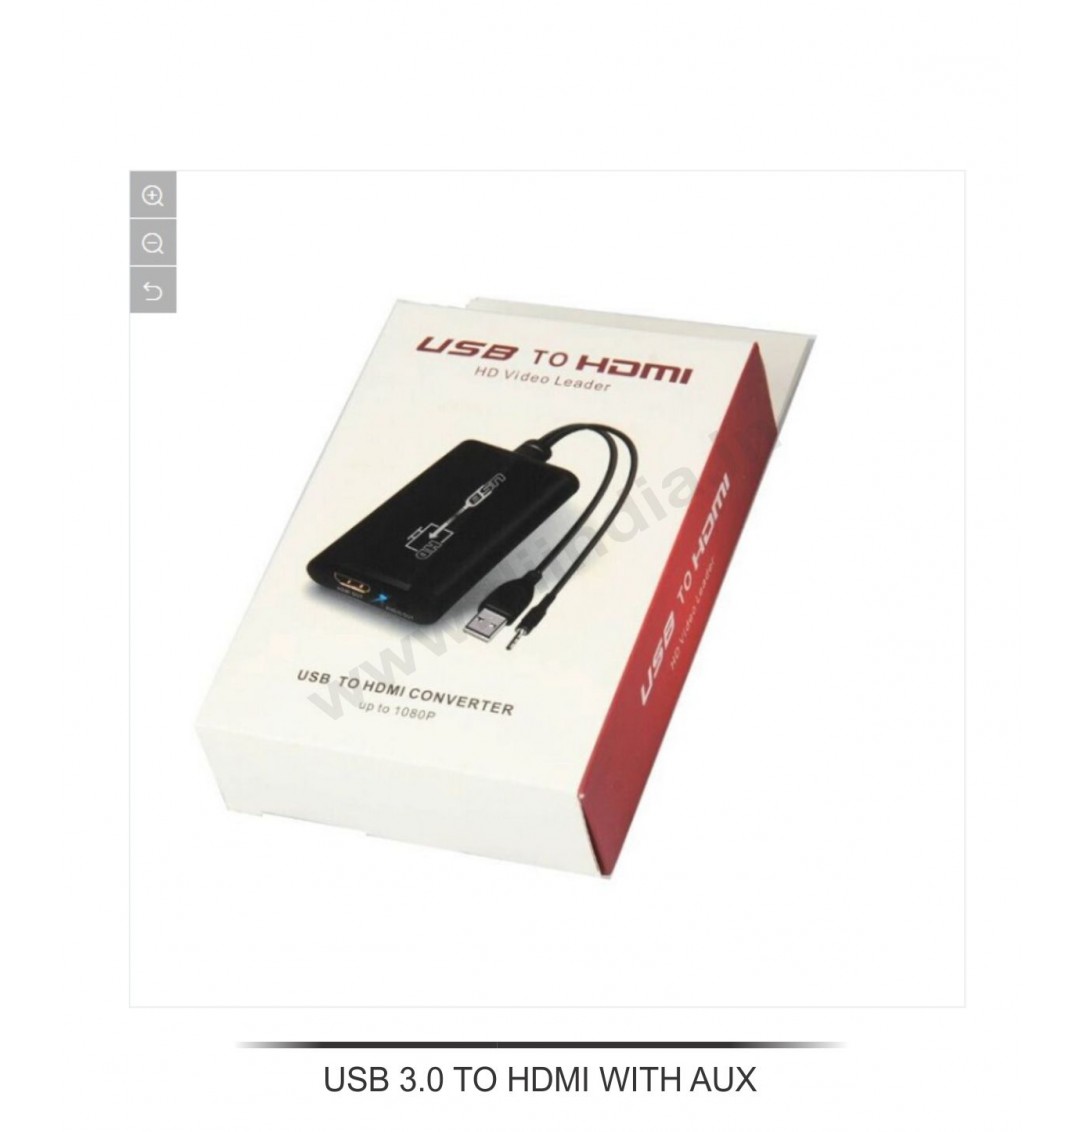 USB 3.0 TO HDMI WITH AUX